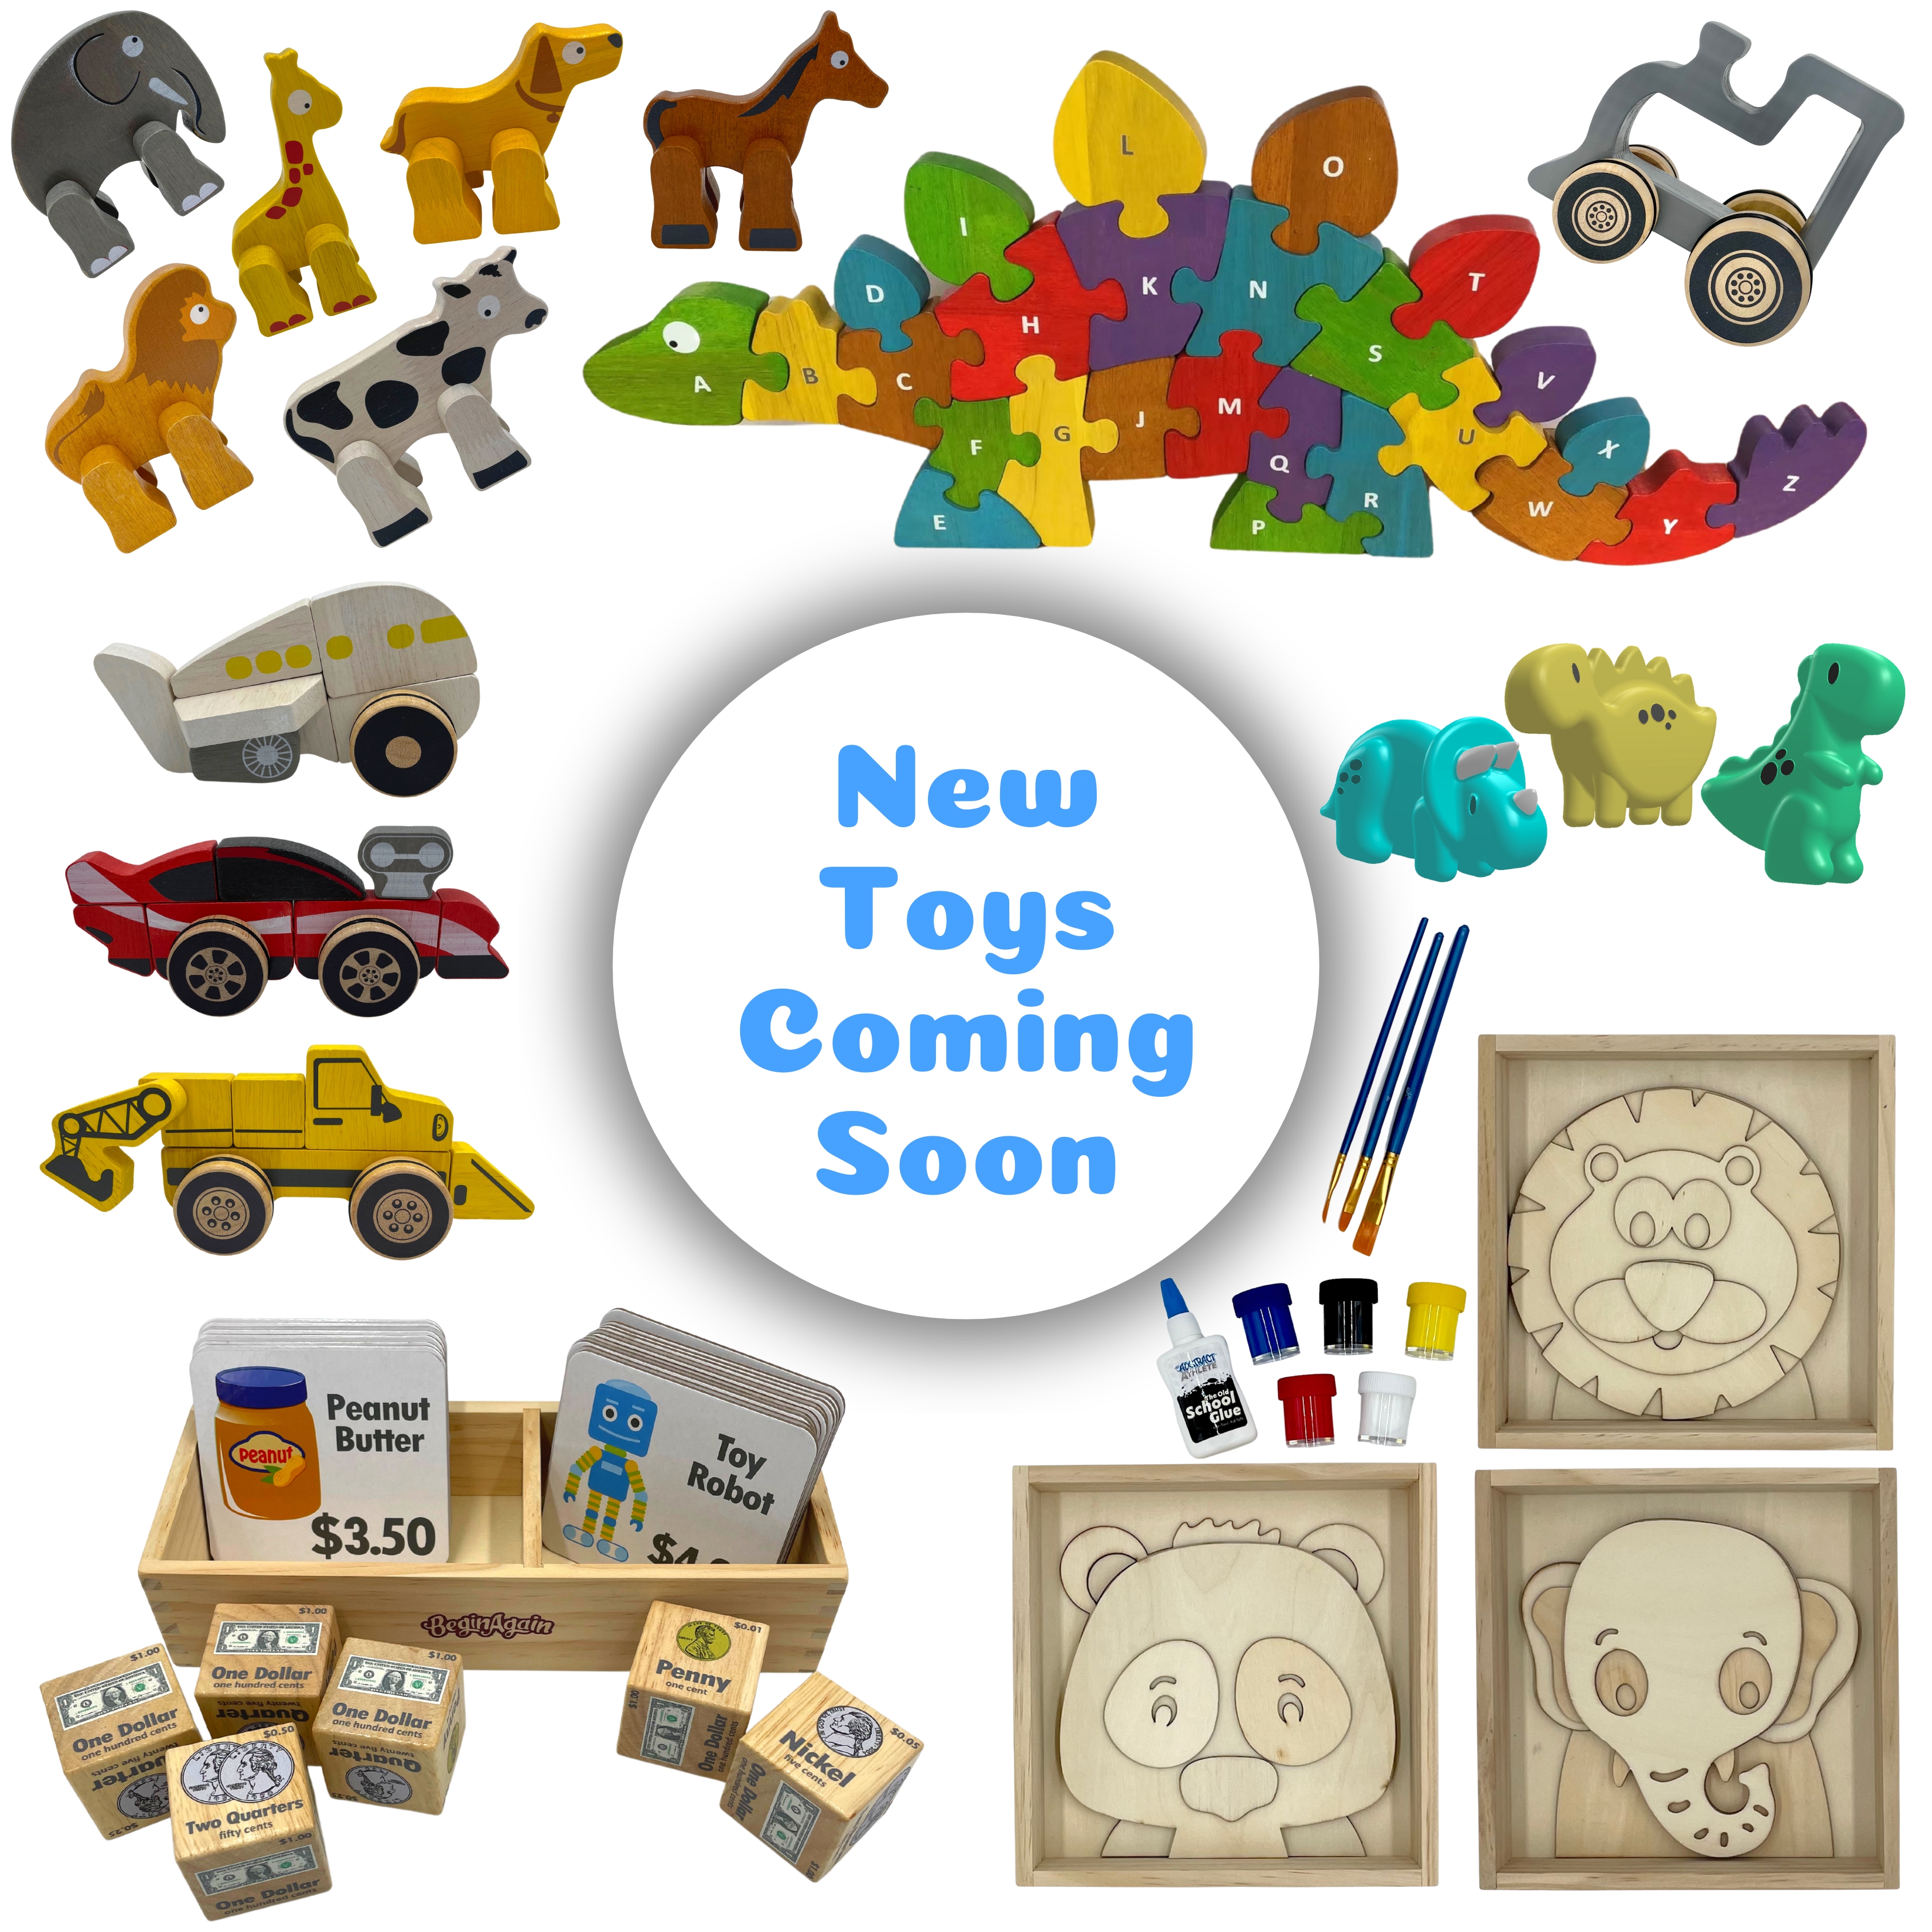 New Toys Coming Soon